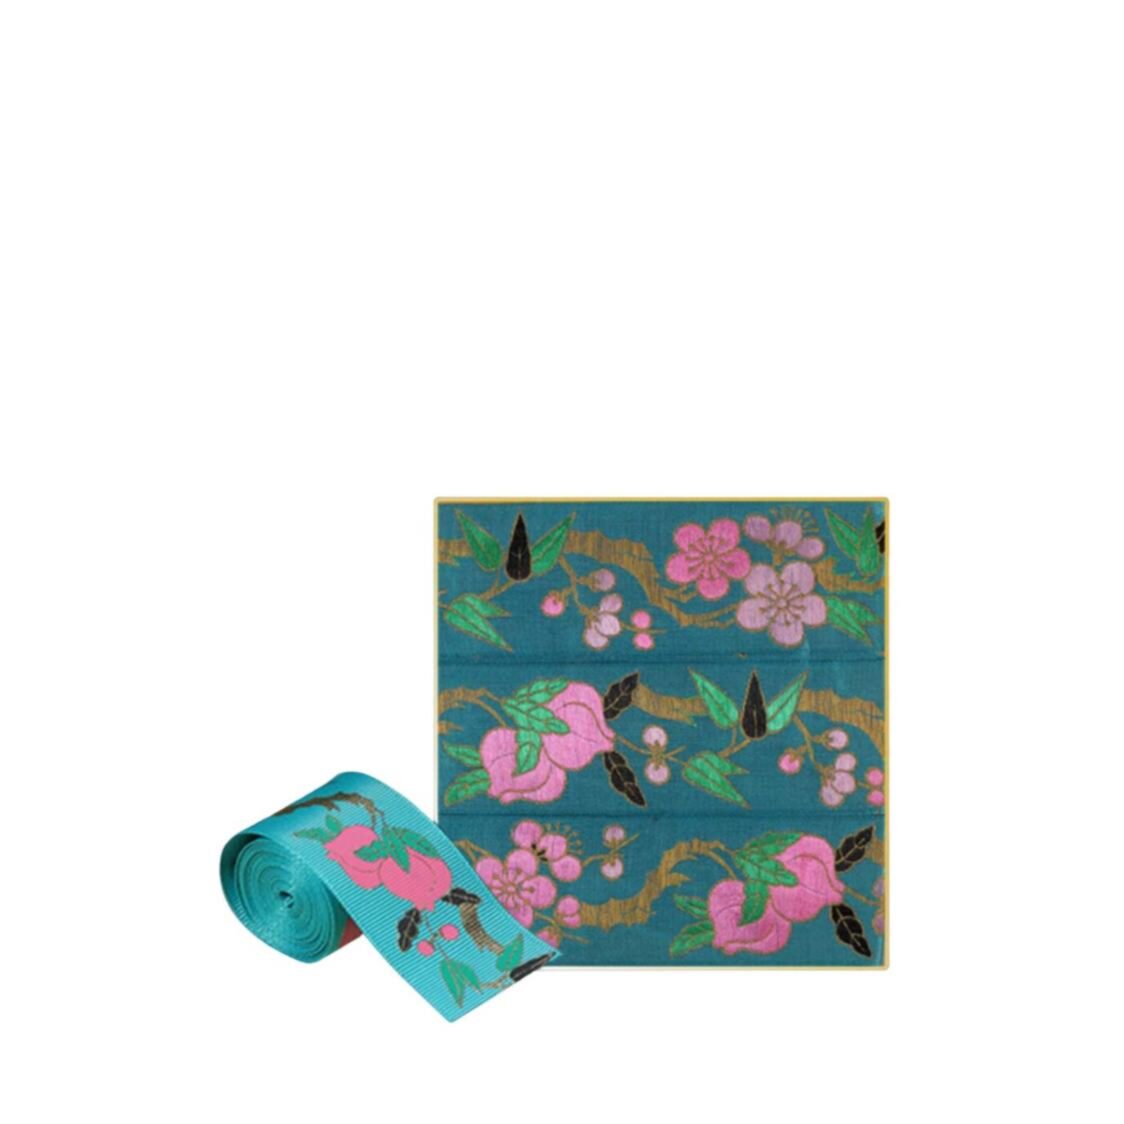 Xuan Culture  Lifestyle Plum Blossom  Bamboo PatternRibbon